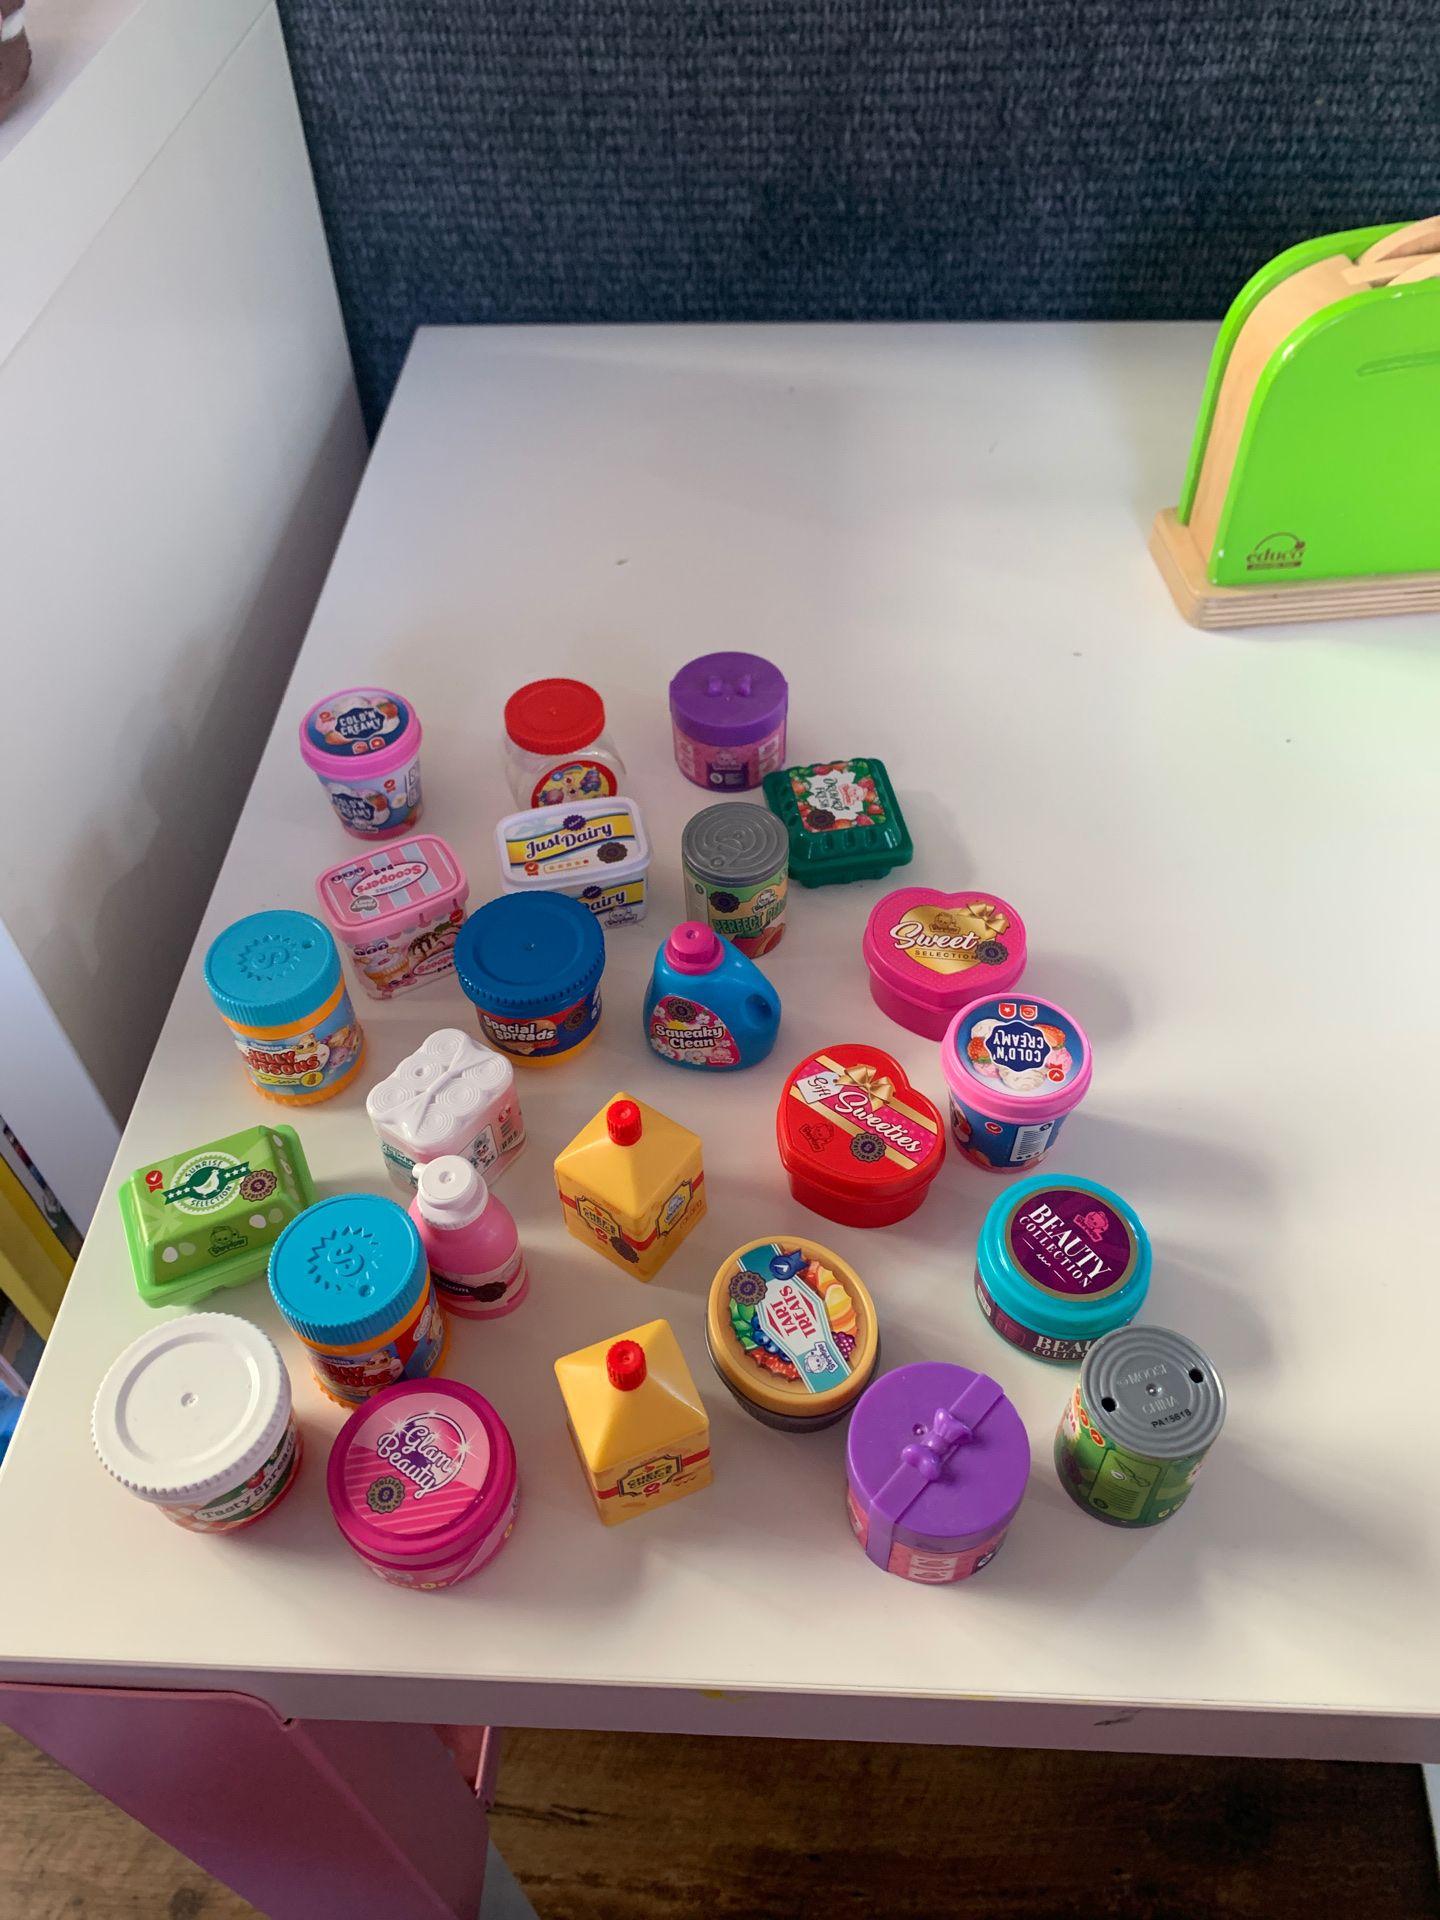 25 empty shopkins containers $5